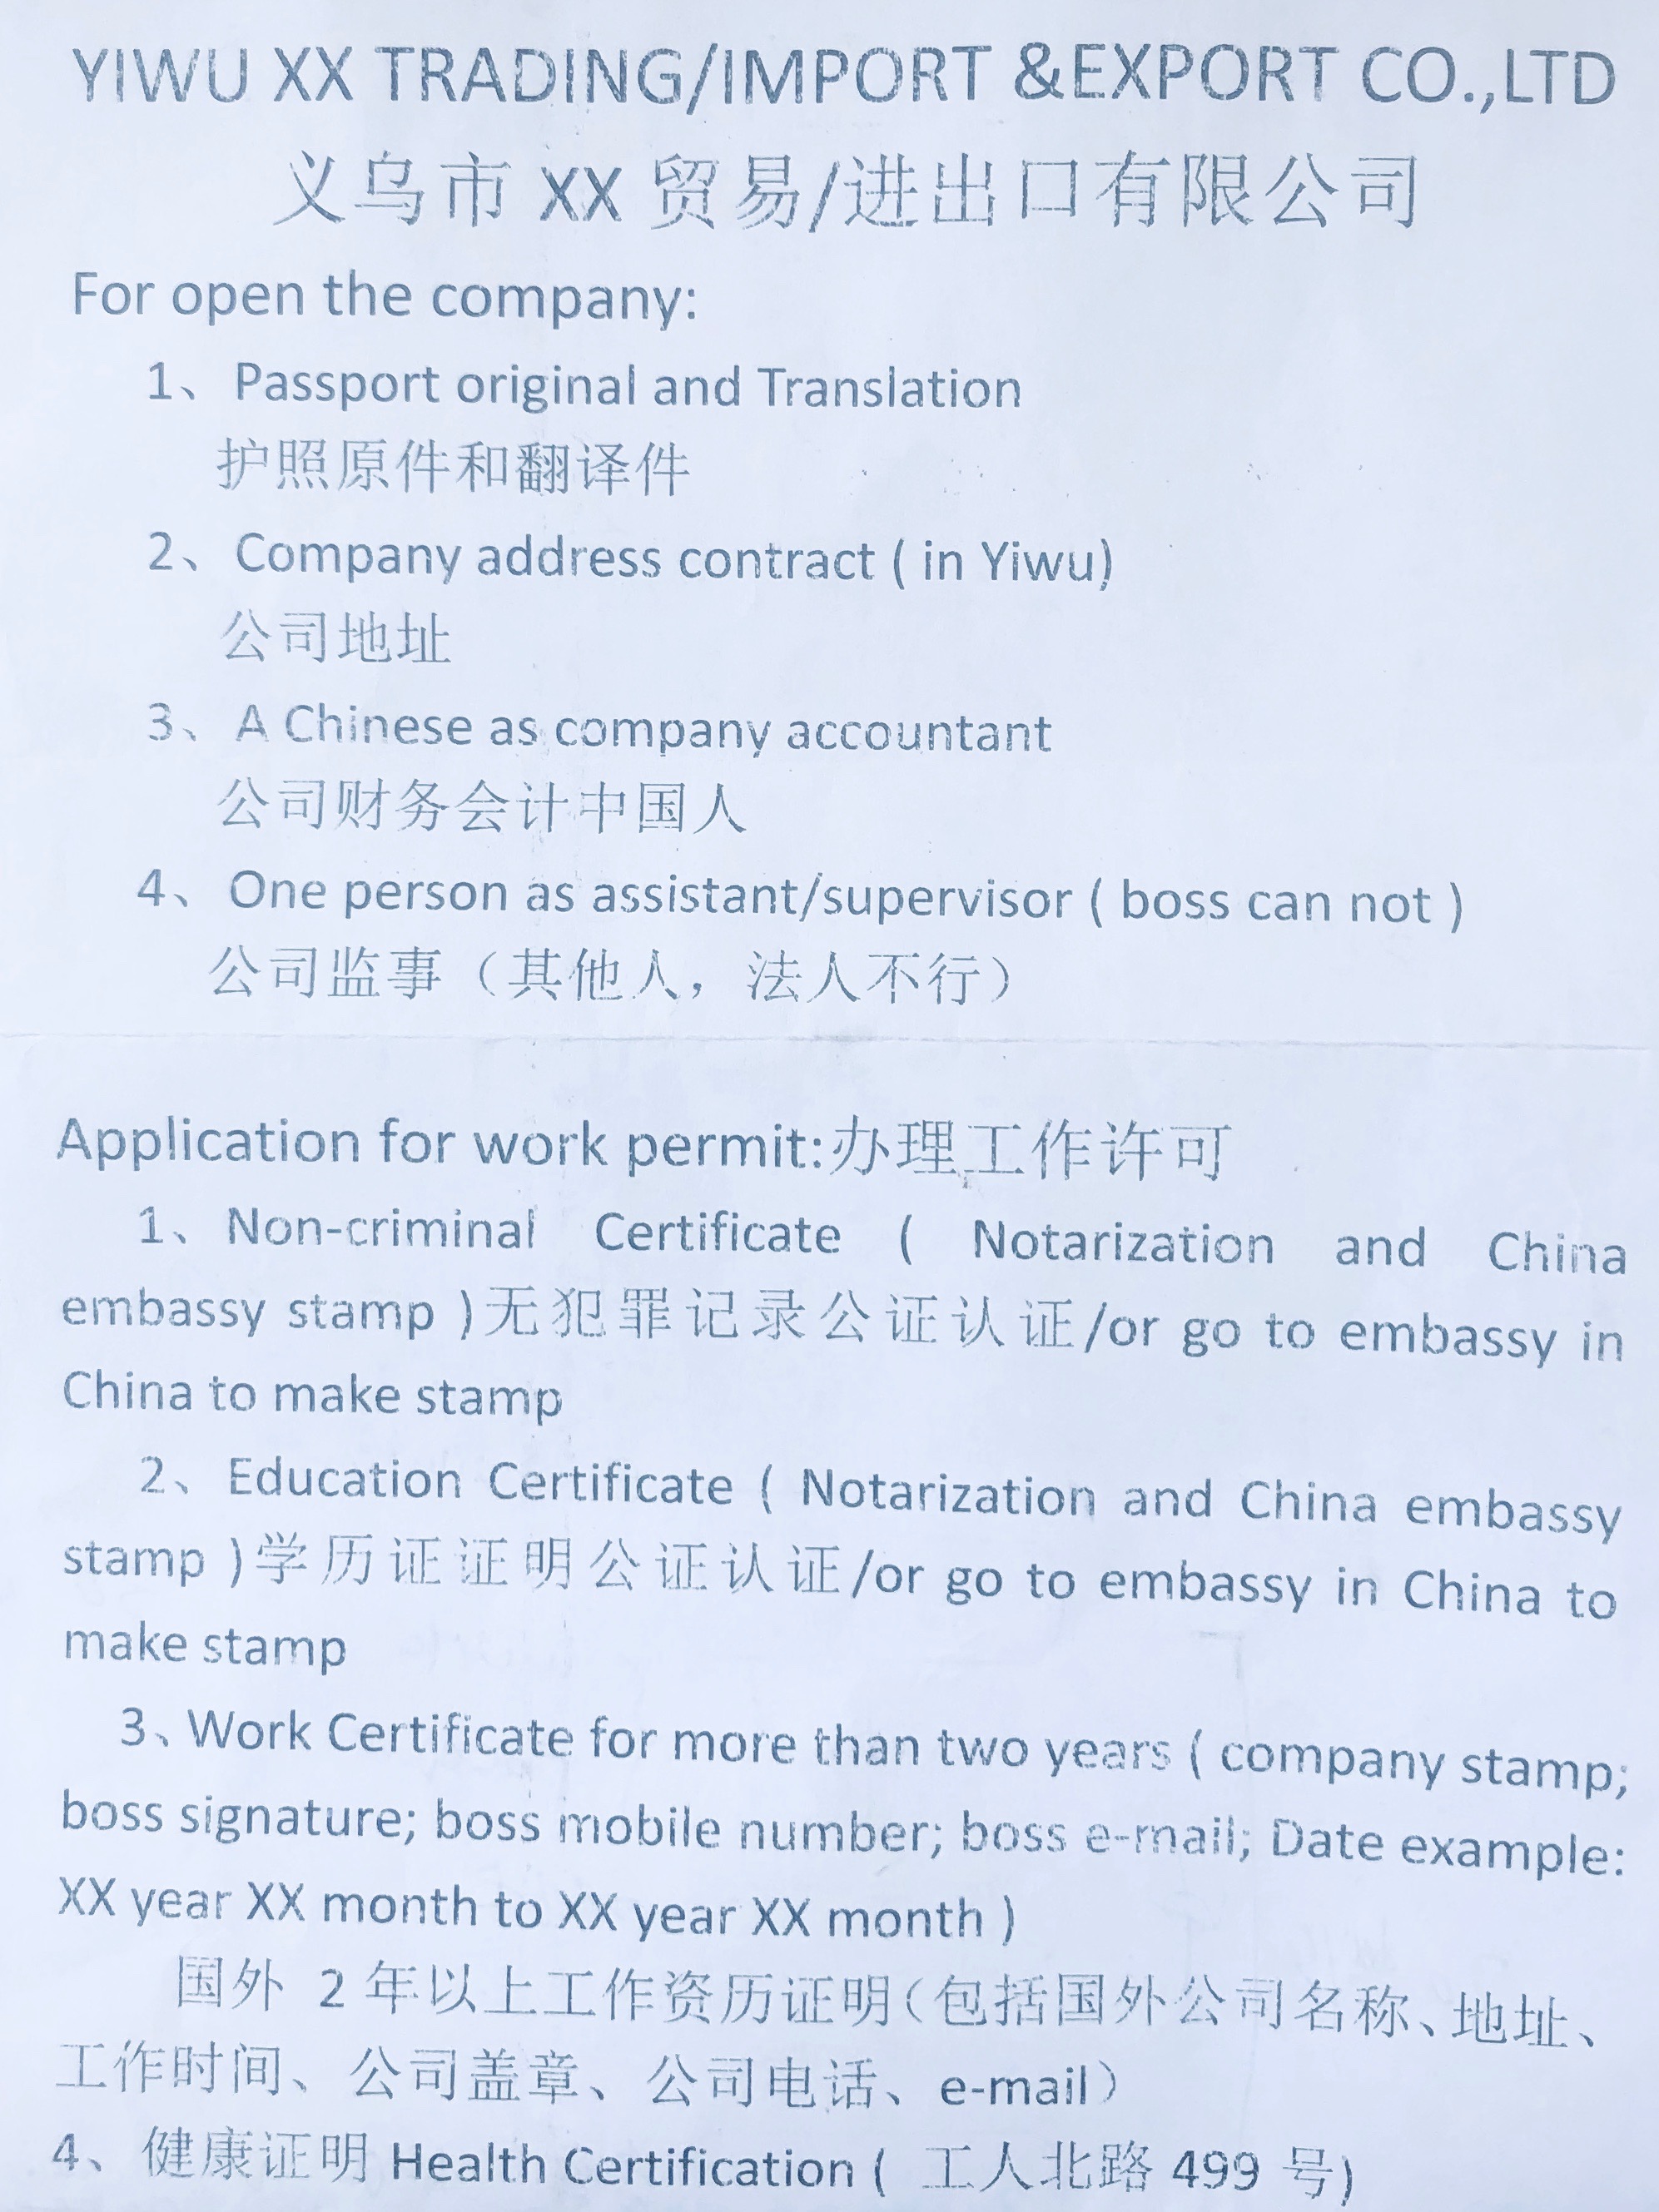 Requirements for open company and get work permit in Yiwu China